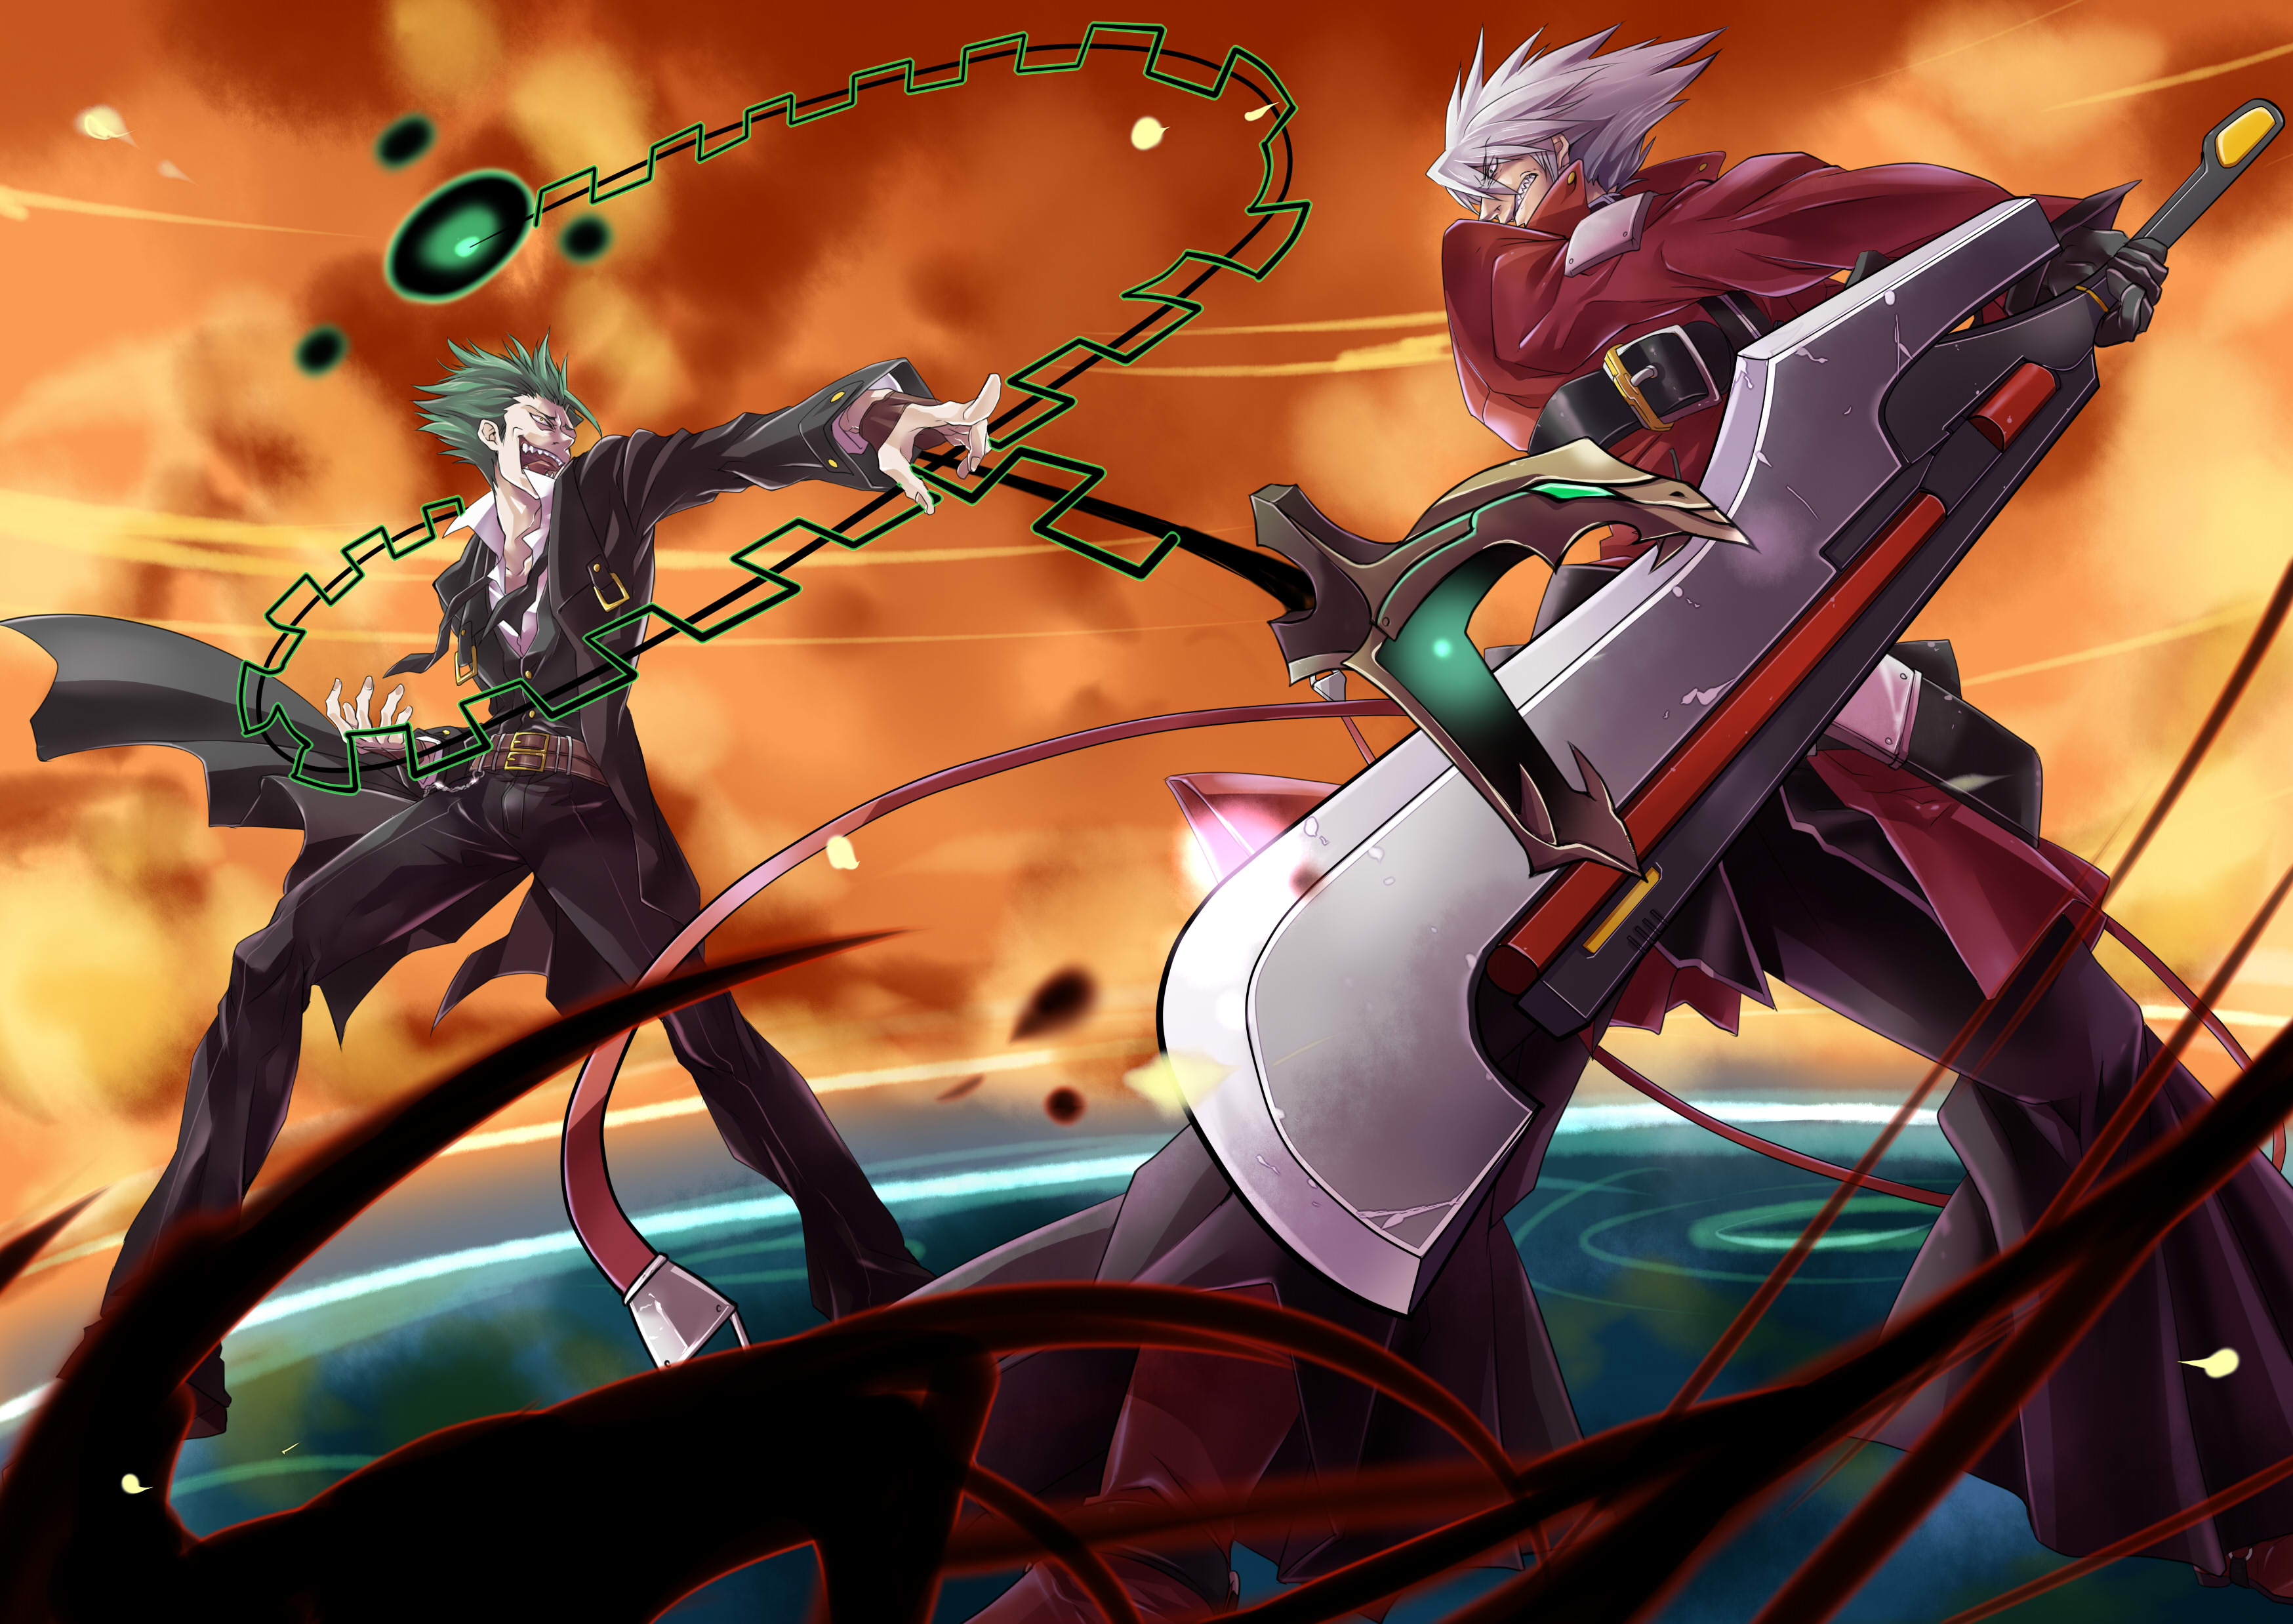 Blazblue, Ragna the Blood Edge - HD Wallpaper View, Resize and Free Downloa...